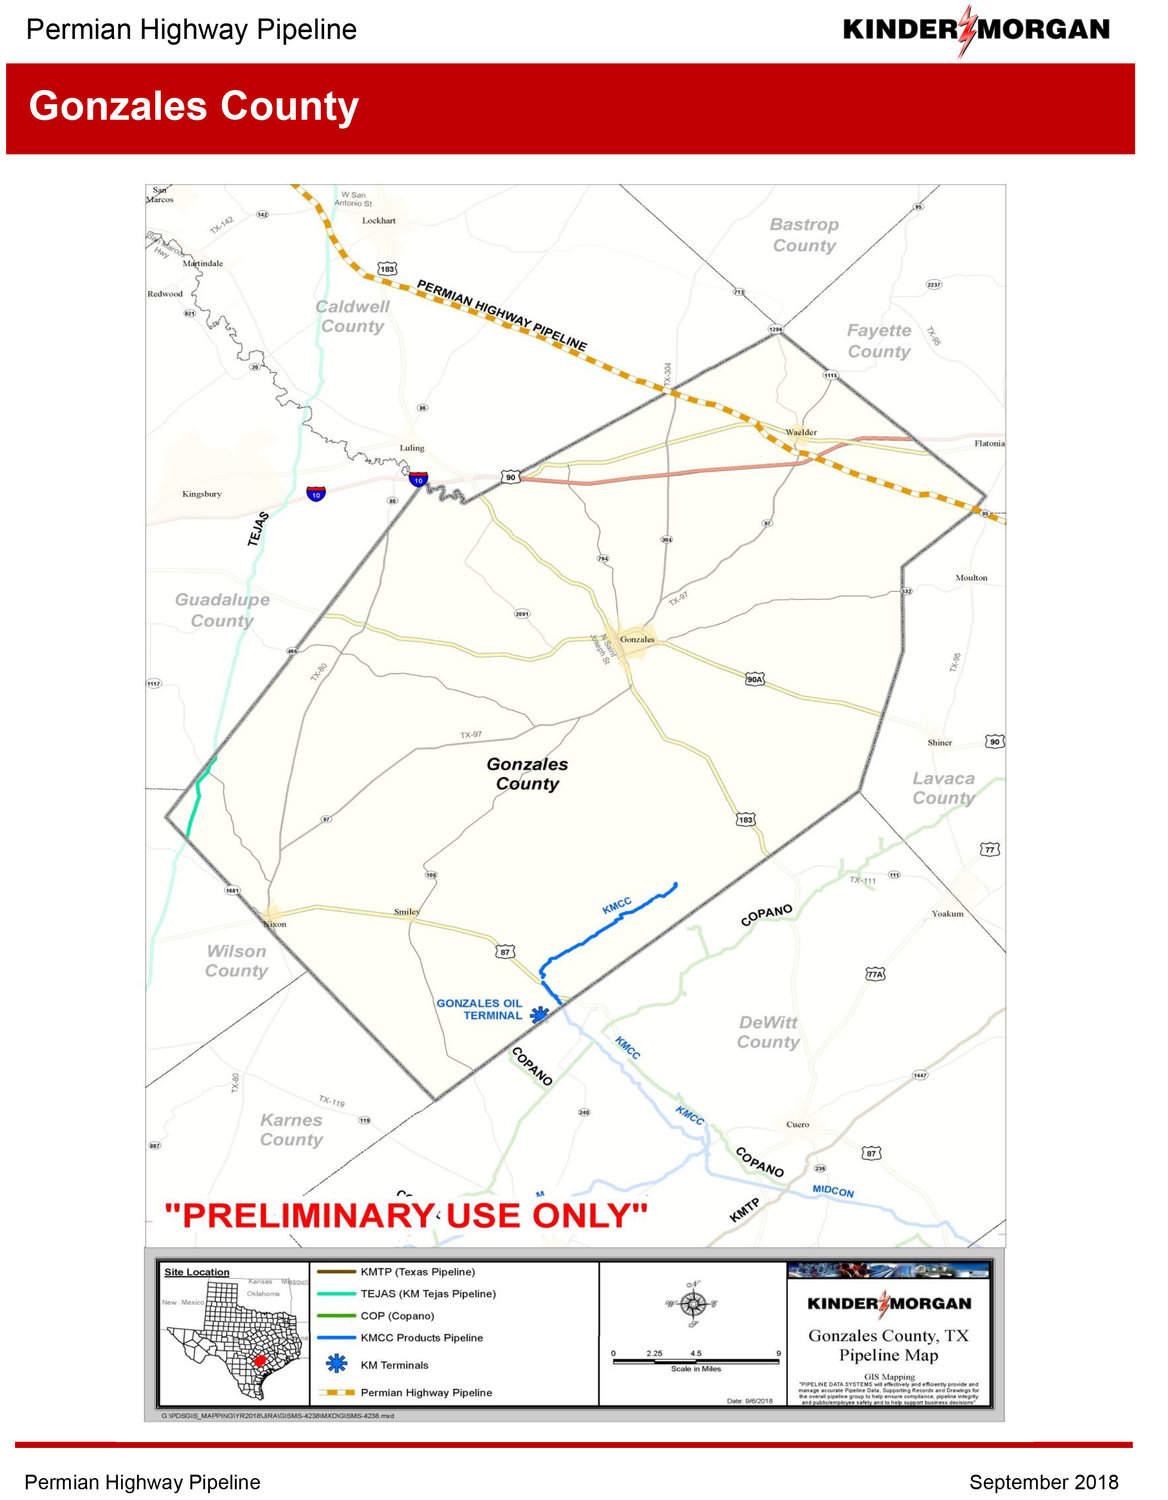 Preliminary maps from Kinder Morgan show the Permian Highway pipeline coming through the northern section of Gonzales County. According to Kinder Morgan, all 53 tracts of land affected by the pipeline have been acquired by the energy company.